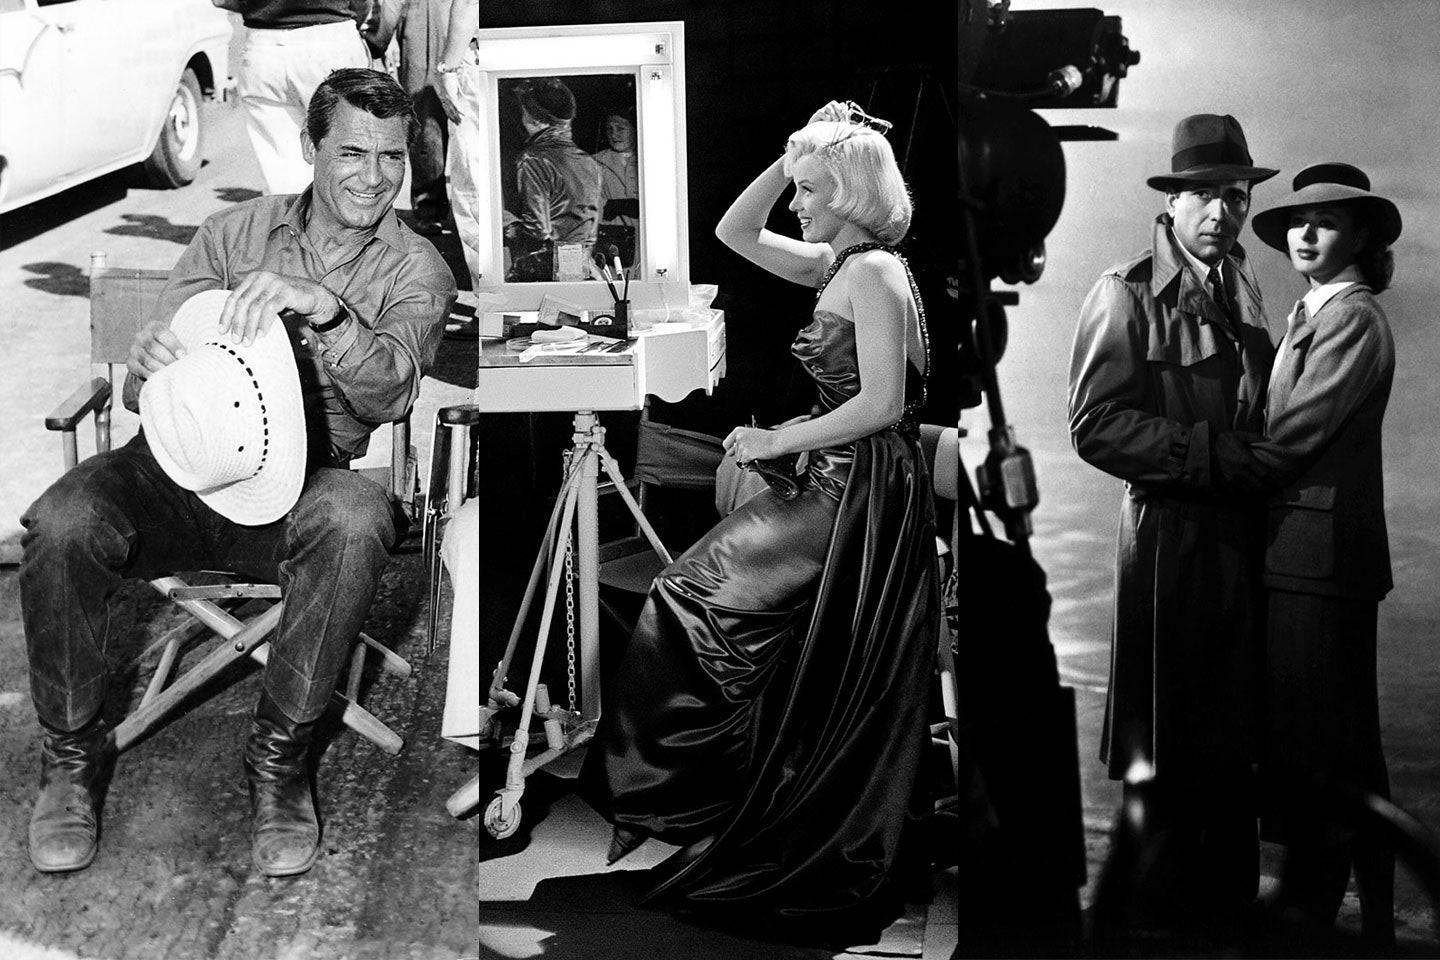 Go Behind The Scenes Of Old Hollywood's Iconic Roles